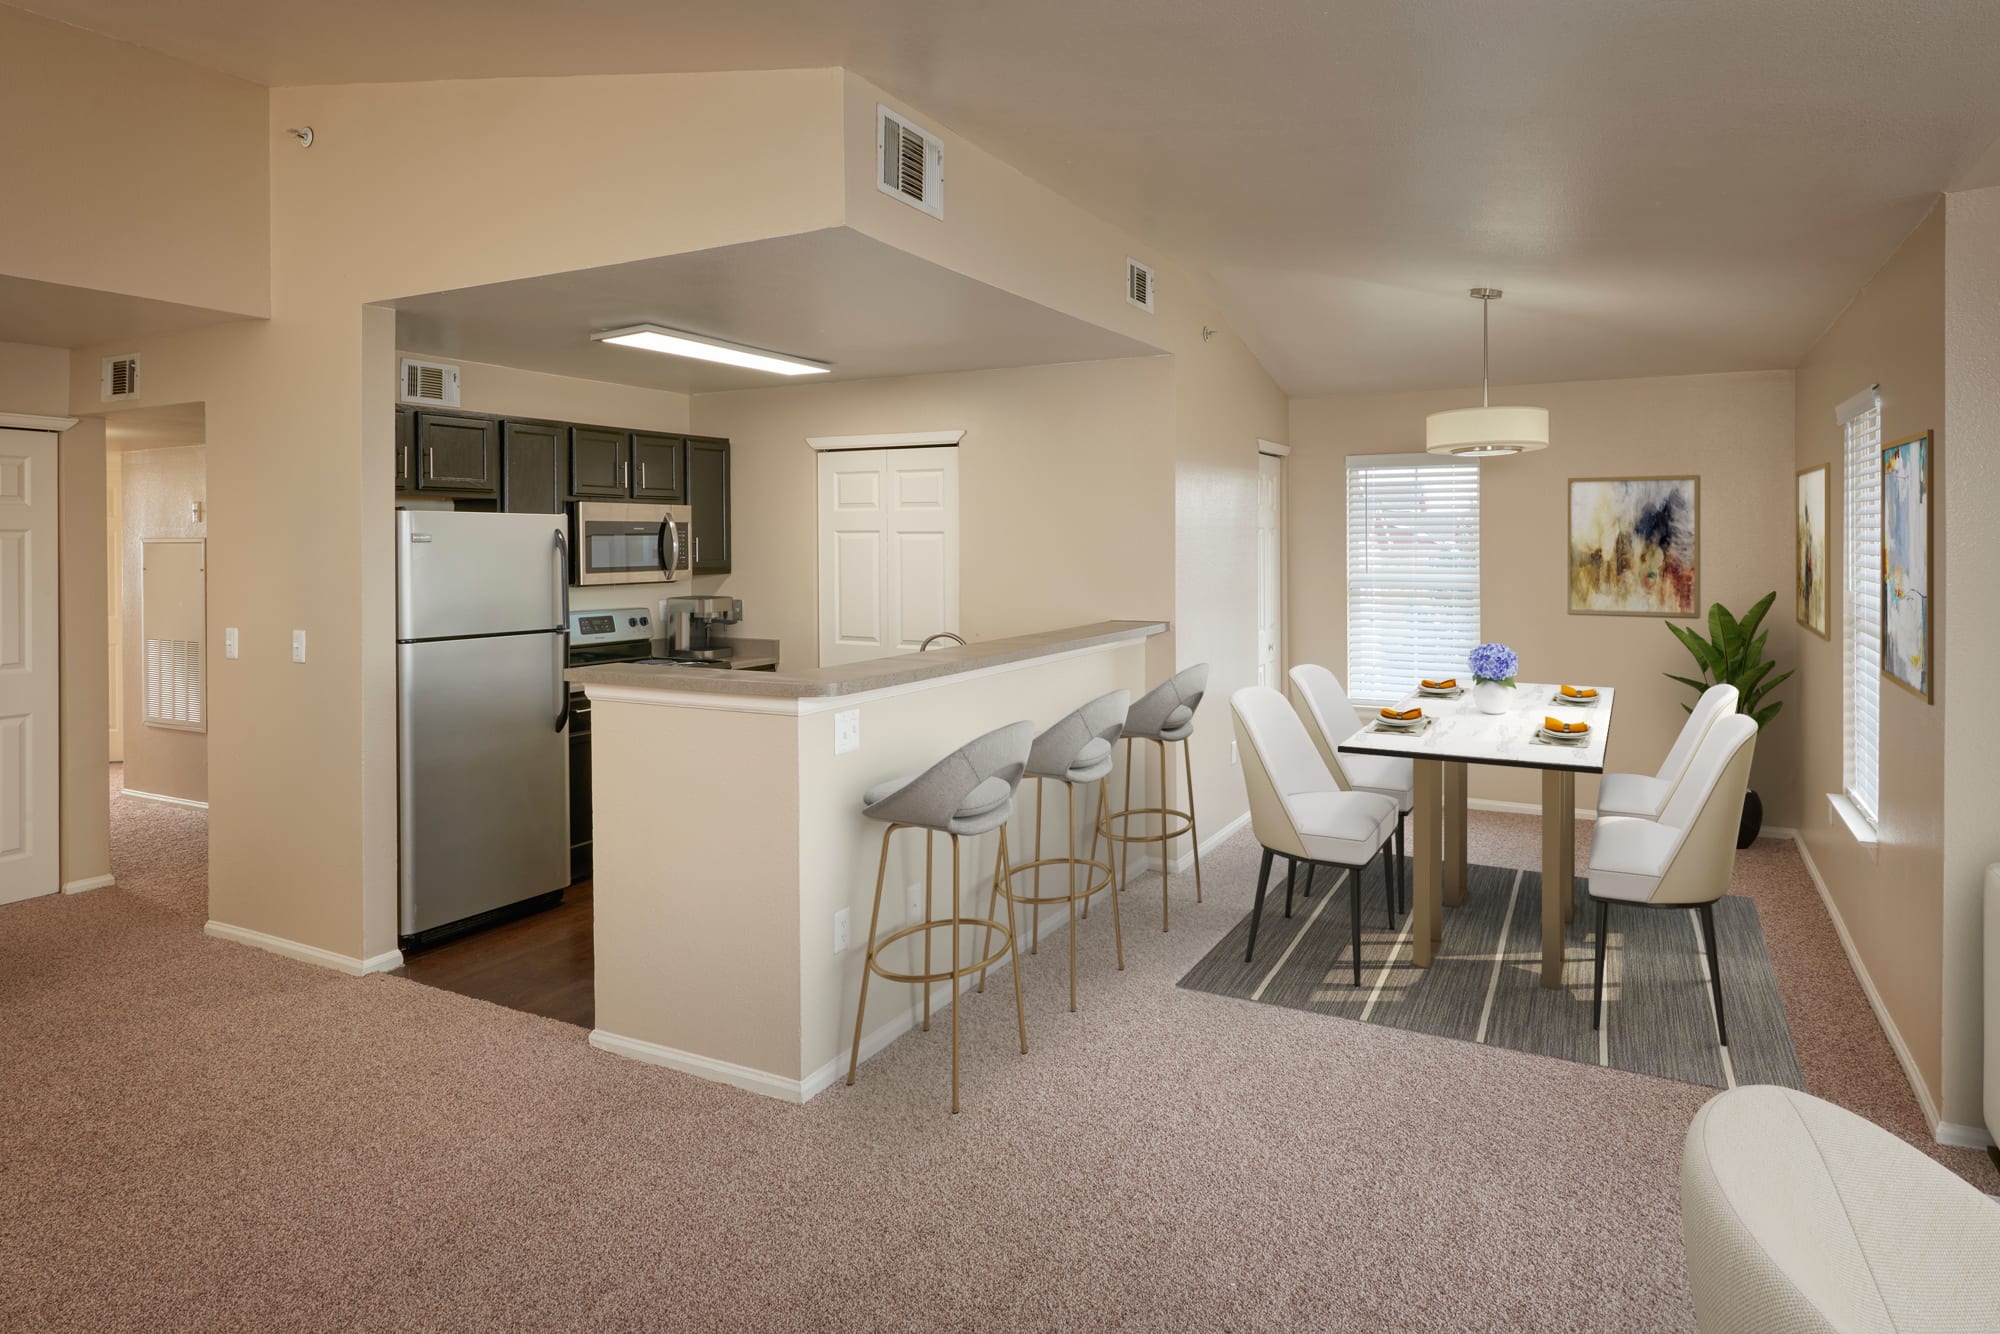 Newly renovated home with white brown cabinetry and stainless steel appliances at Westridge Apartments in Aurora, Colorado